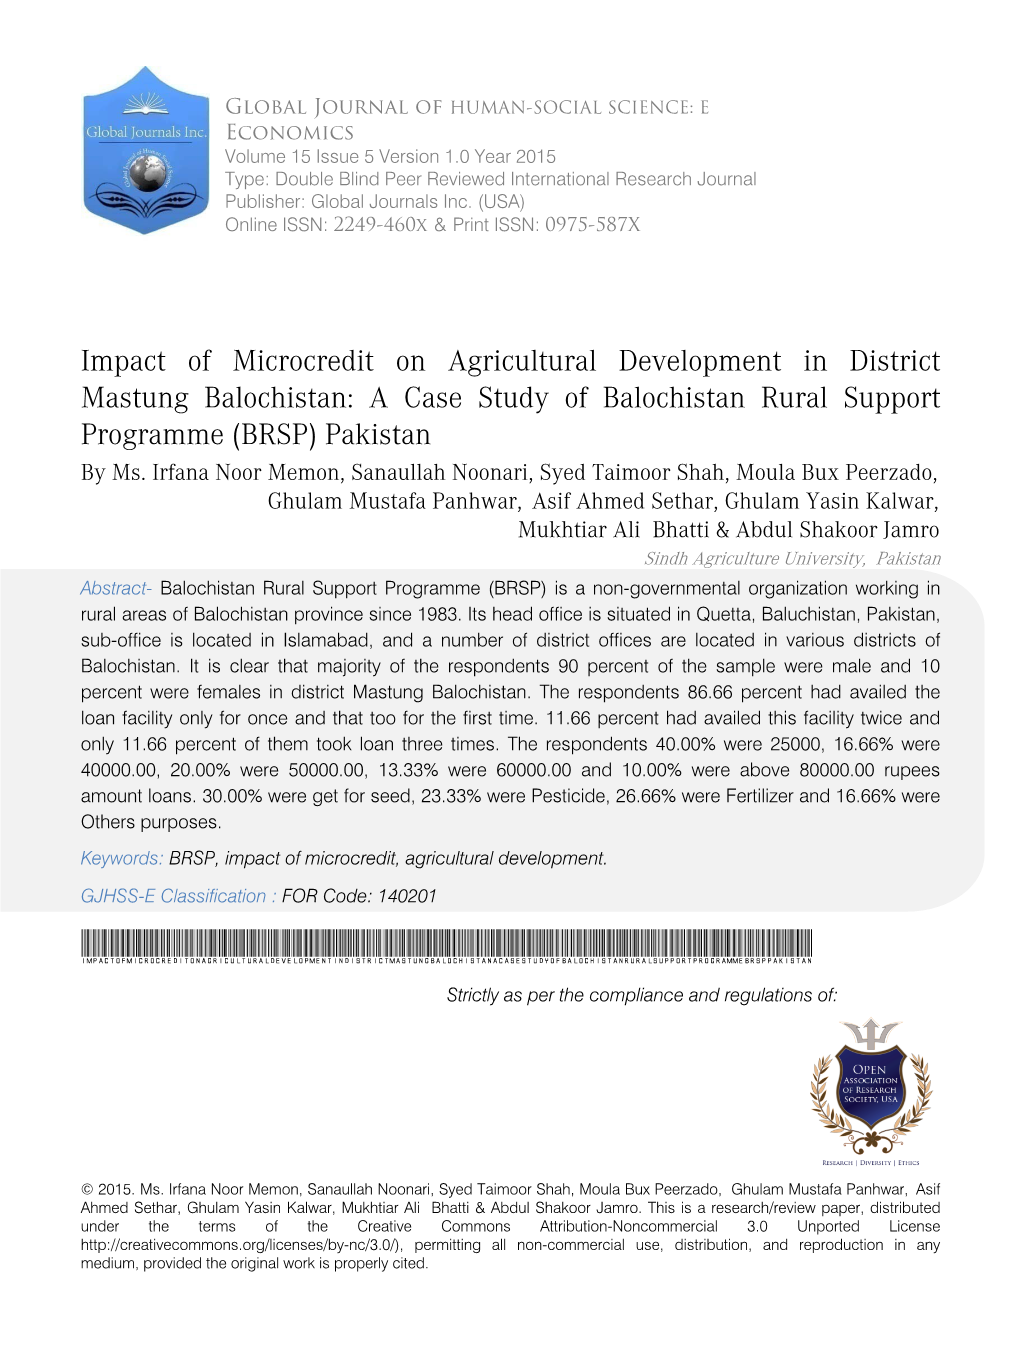 Impact of Microcredit on Agricultural Development in District Mastung Balochistan: a Case Study of Balochistan Rural Support Programme (BRSP) Pakistan by Ms